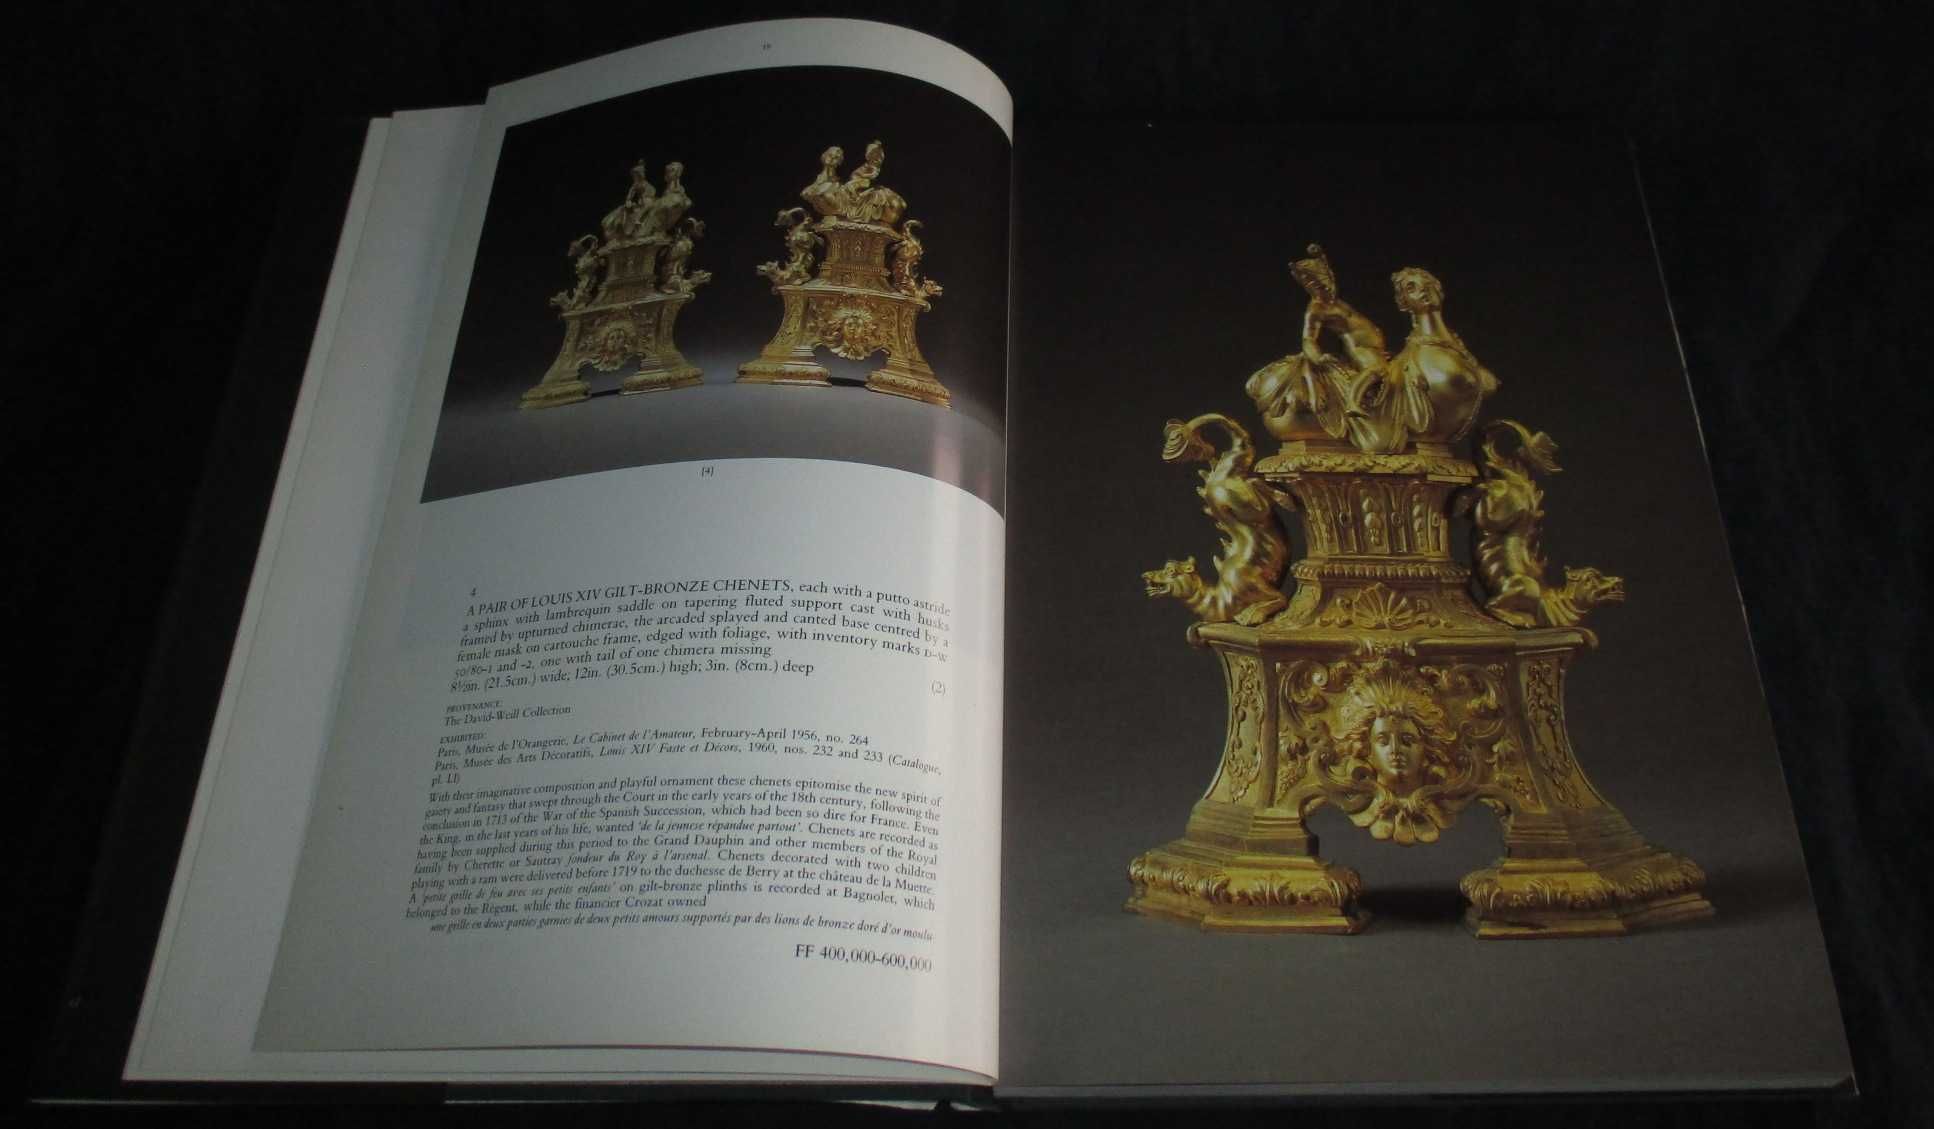 Livro Magnificent French Furniture Collection of Hubert de Givenchy